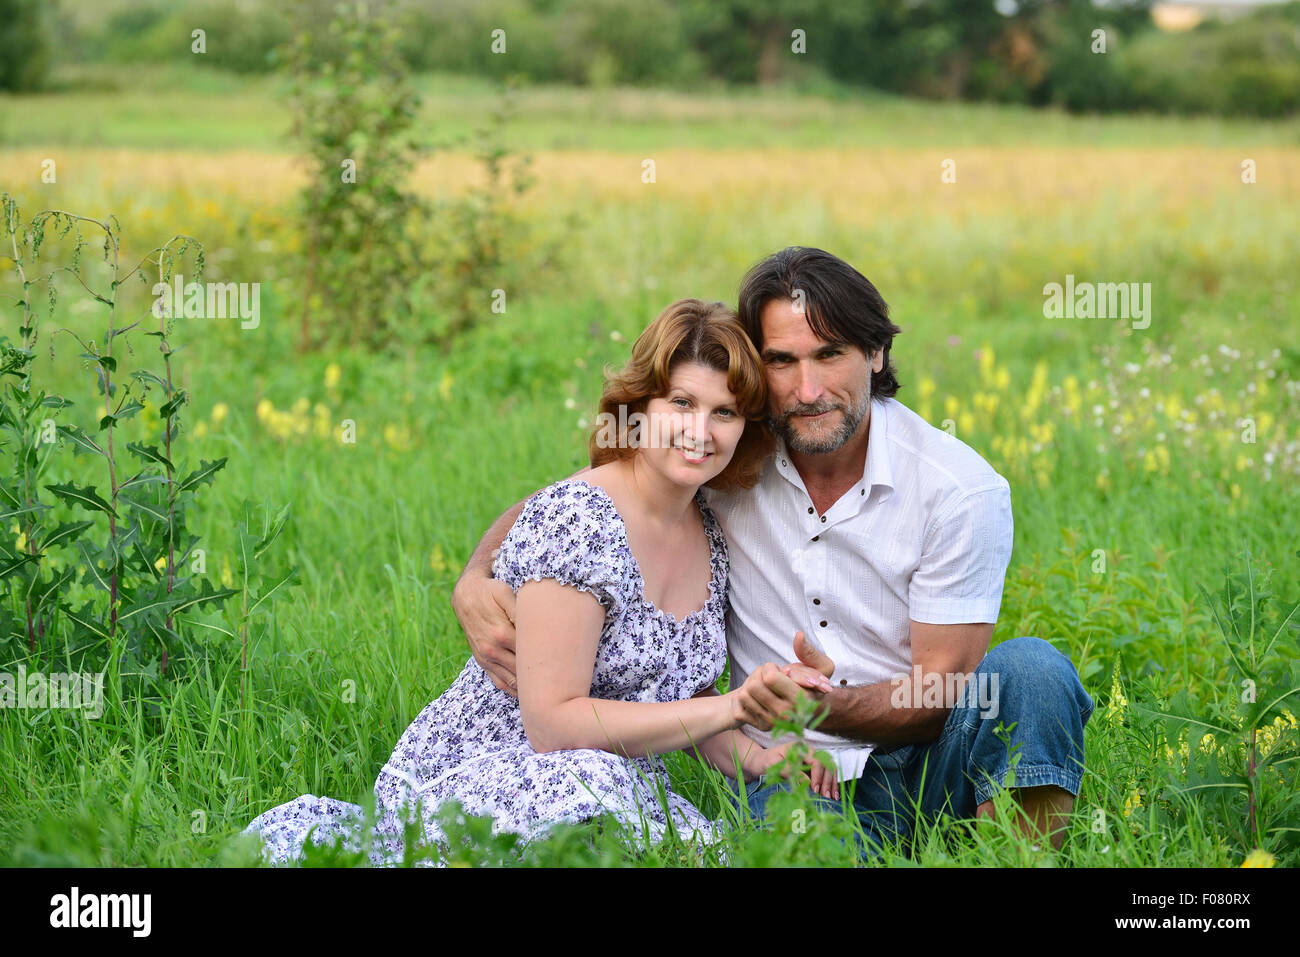 A Loving couple relaxing on a meadow Stock Photo